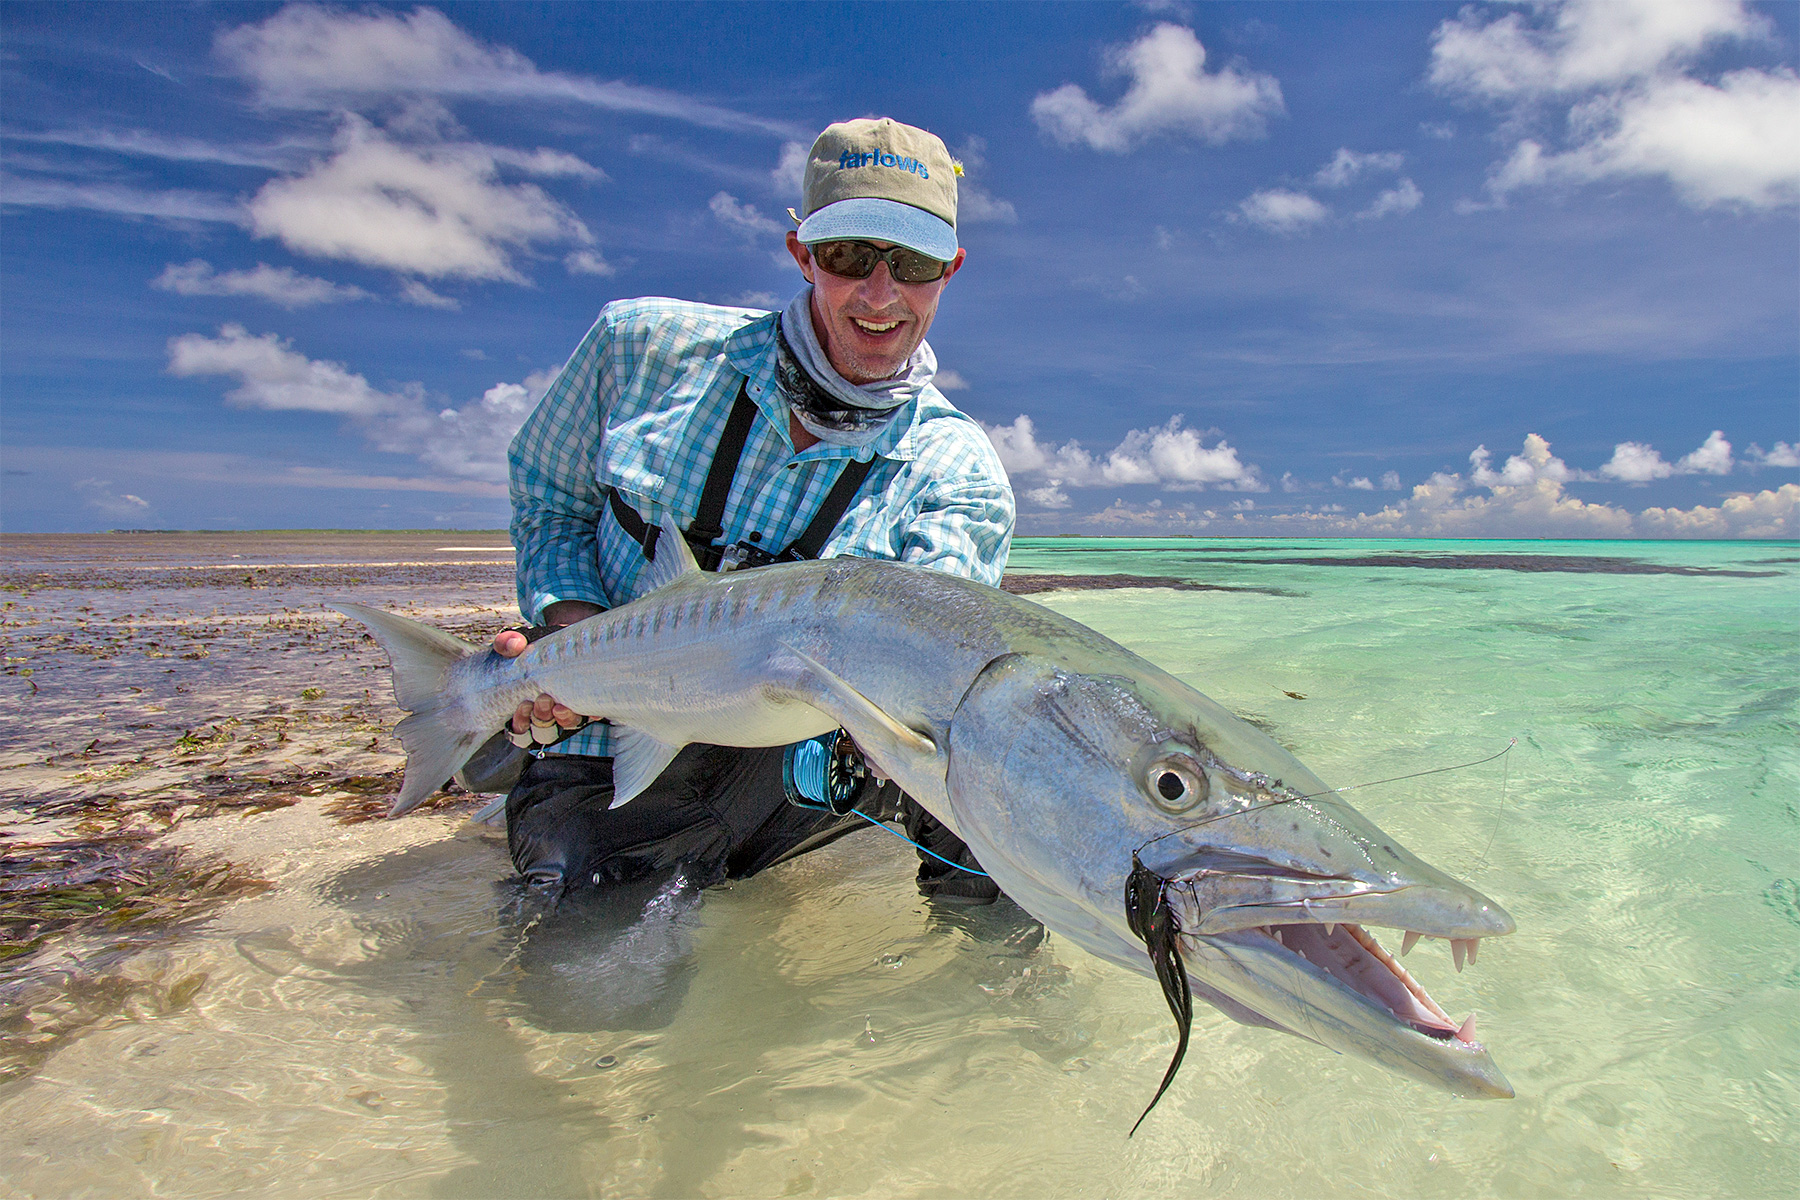 Barracuda Saltwater Fish Species - The Fly Shop